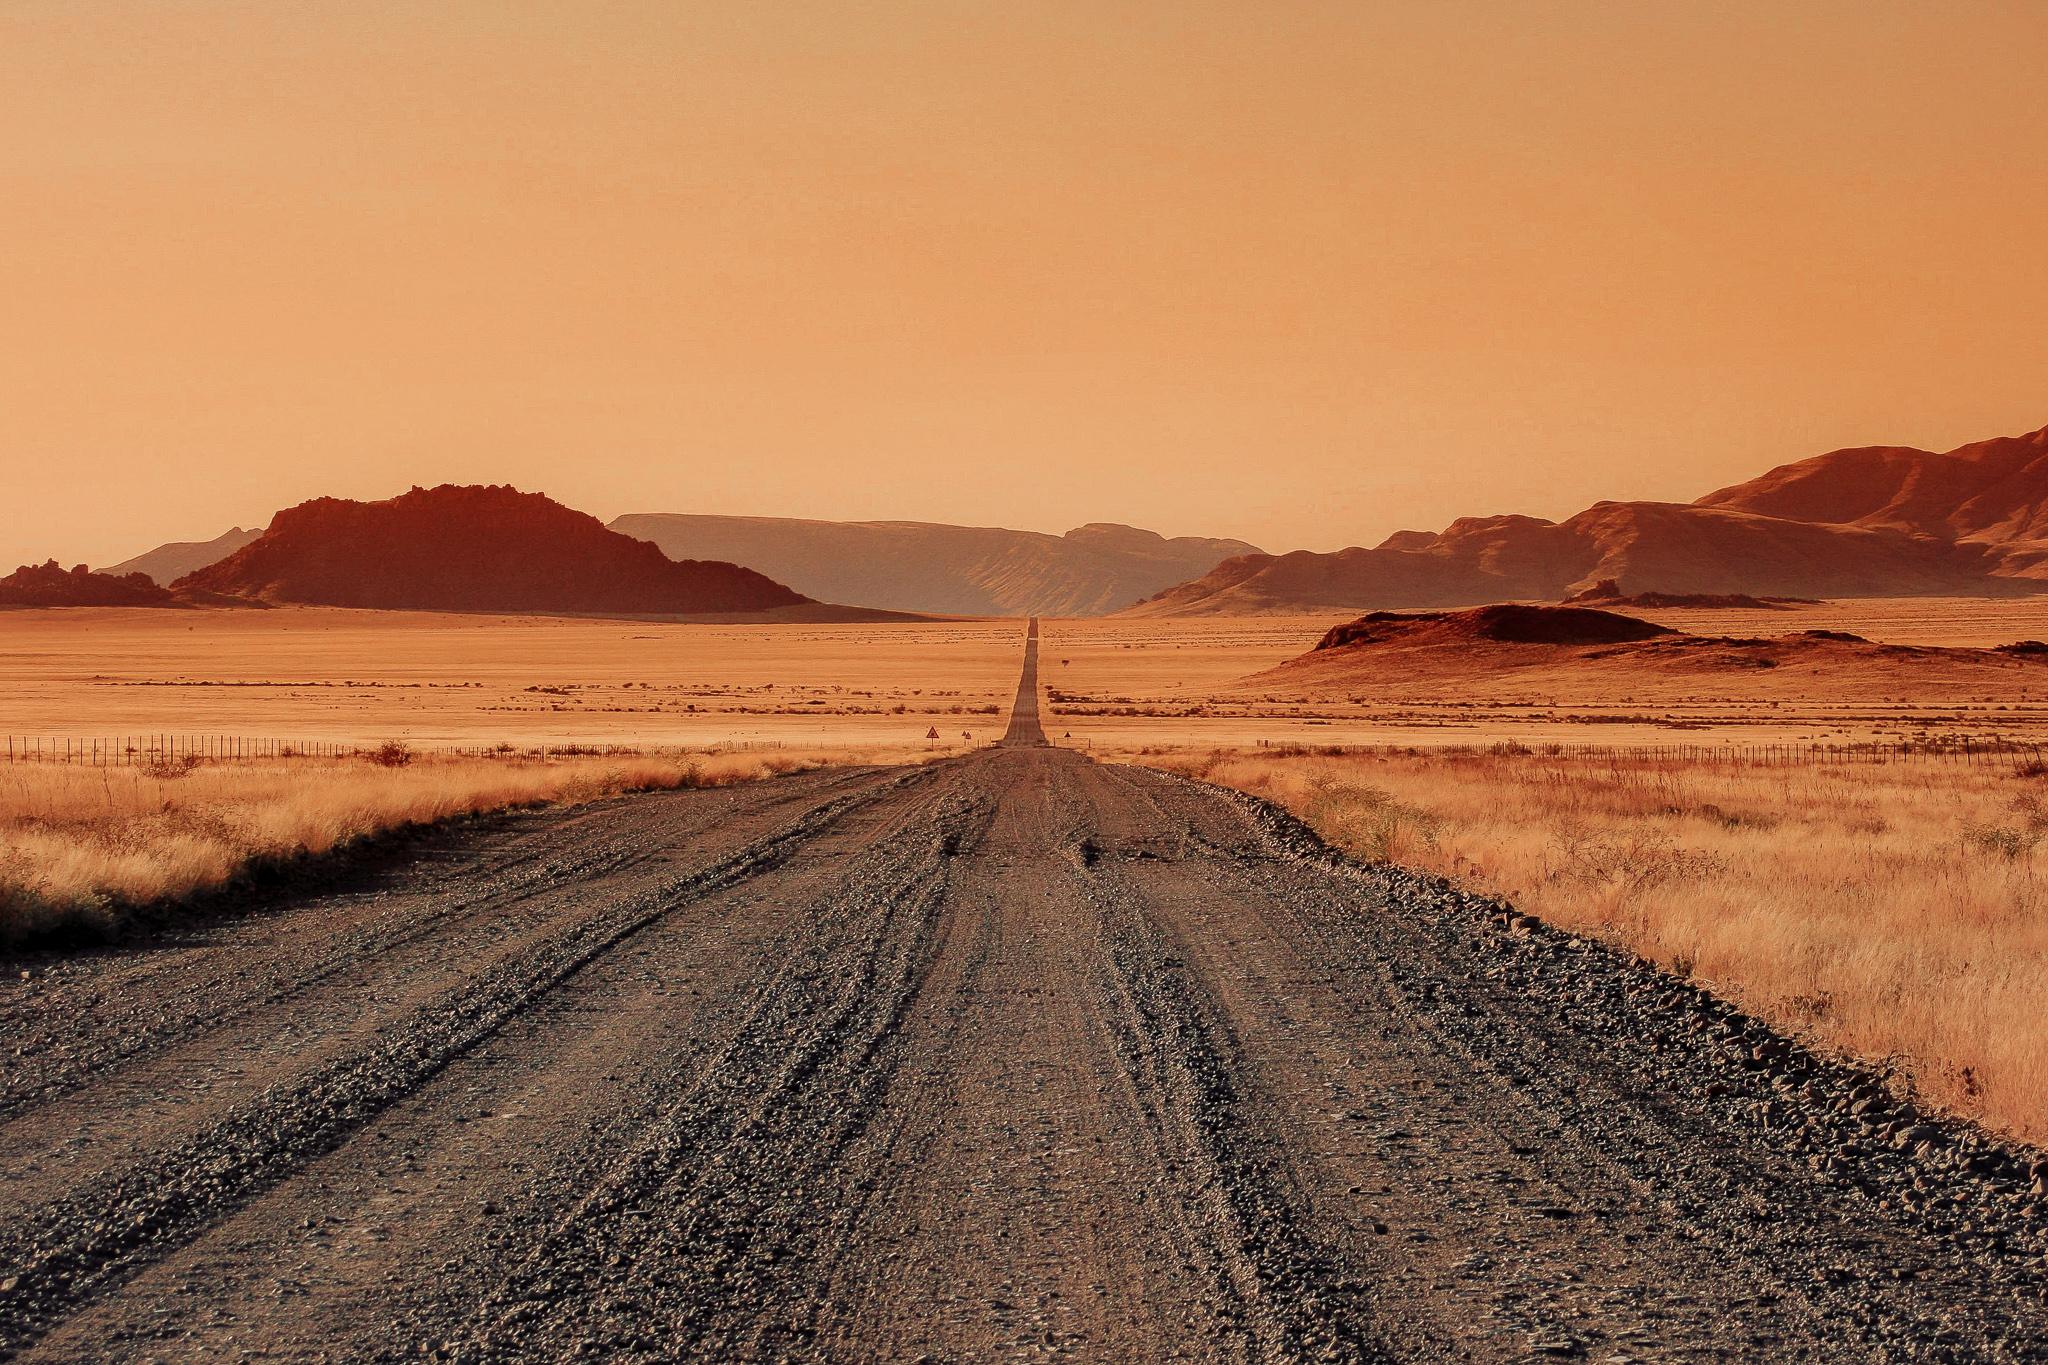 A deserted gravel road encountered during a Namibia self drive with red mountains and canyons in the far distance